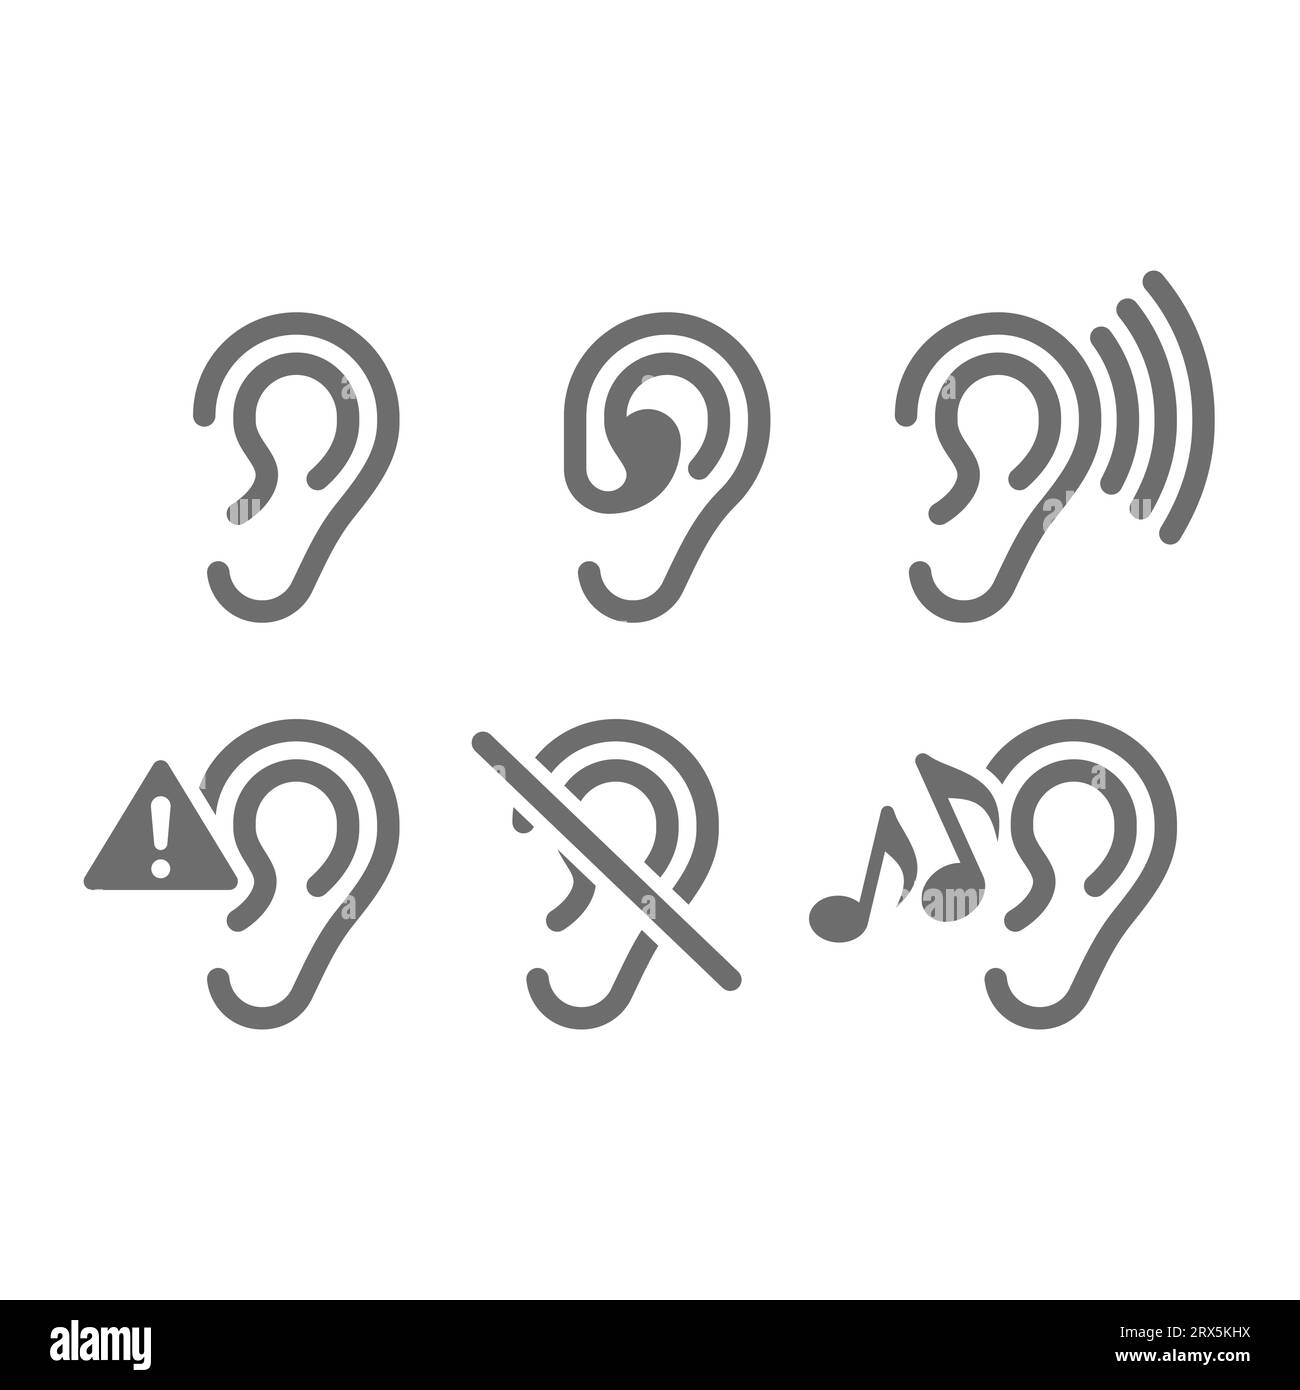 Ear and hearing aid vector icon set. Ears, deafness and listening symbol icons. Stock Vector